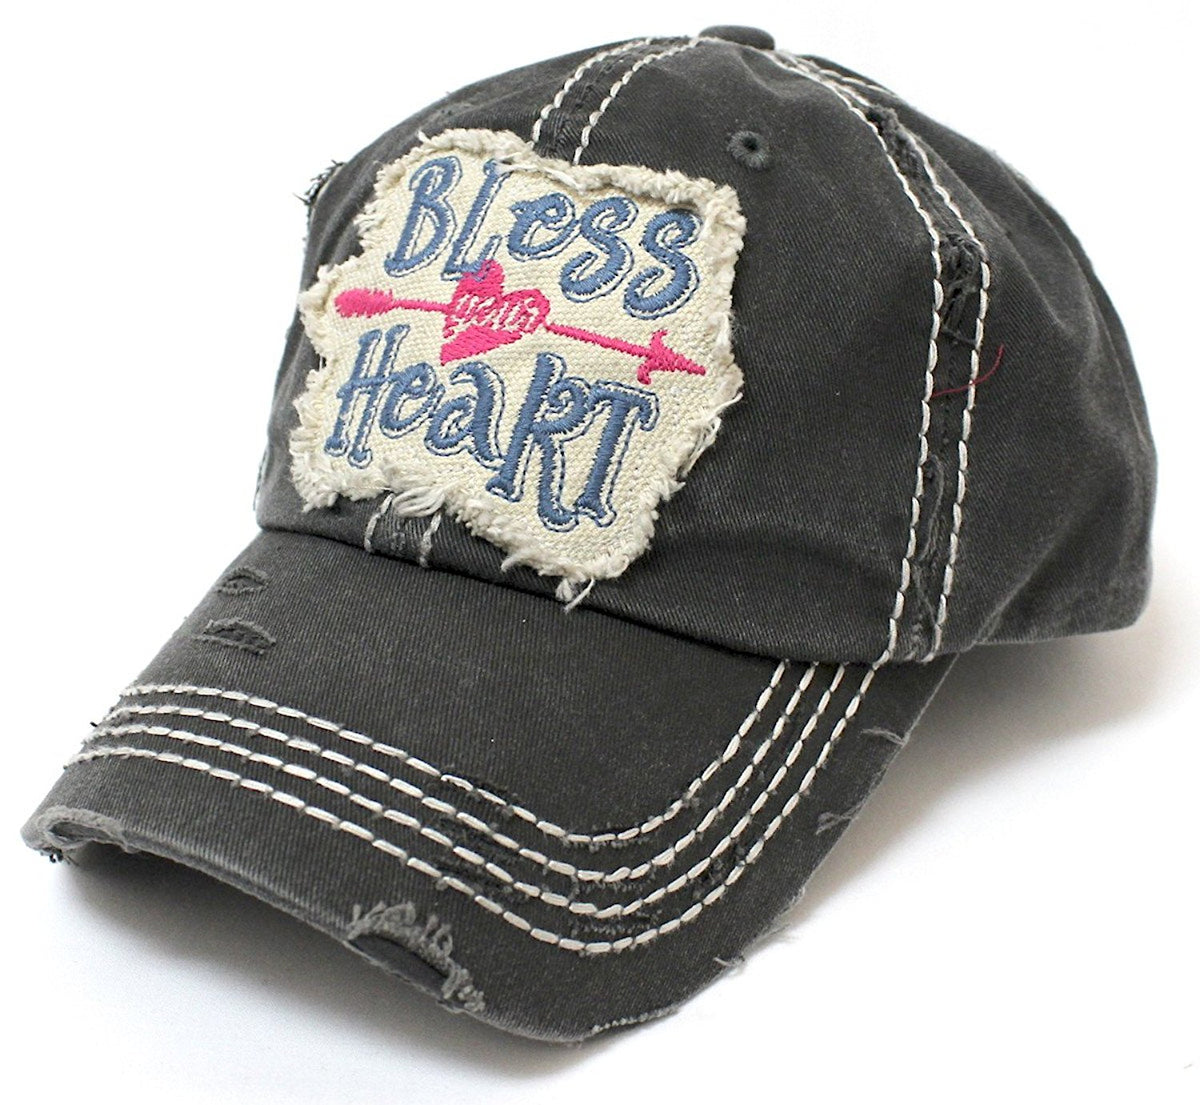 CAPS 'N VINTAGE Women's Bless Your Heart Vintage Embroidery Baseball Hat - Caps 'N Vintage 